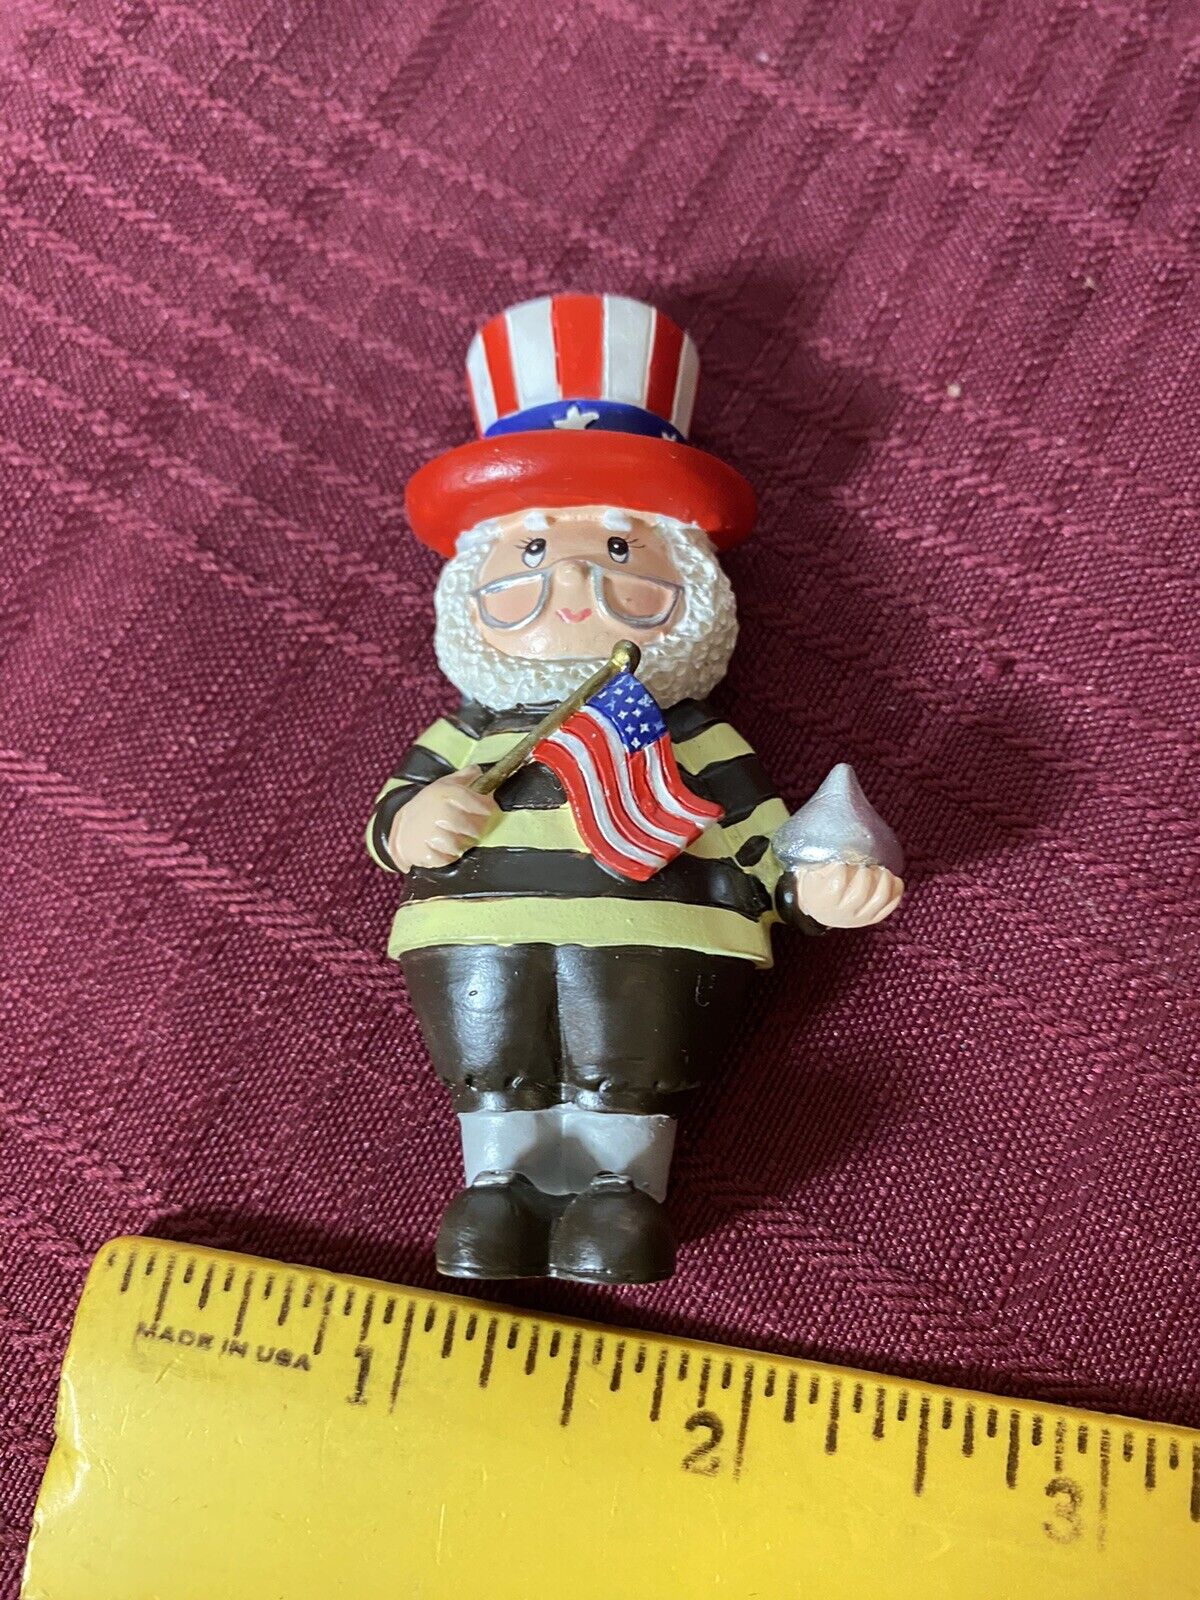 Hershey’s Magnets- Chocolatier Elf at Holidays (July 4th- Red, White & Blue)